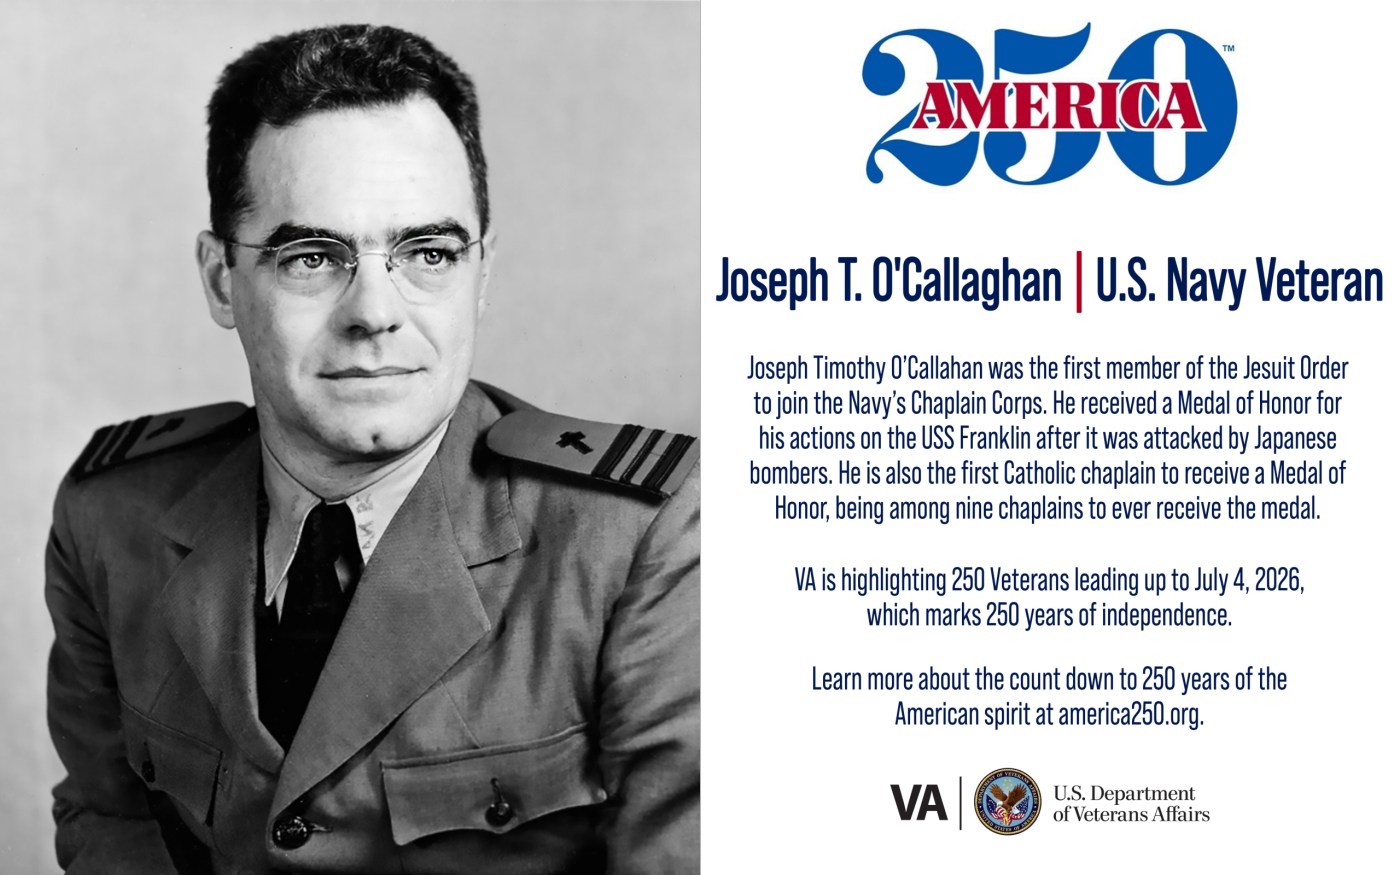 This week’s America250 salute is Navy Veteran Joseph T. O’Callahan, who served as a chaplain in World War II and received a Medal of Honor.